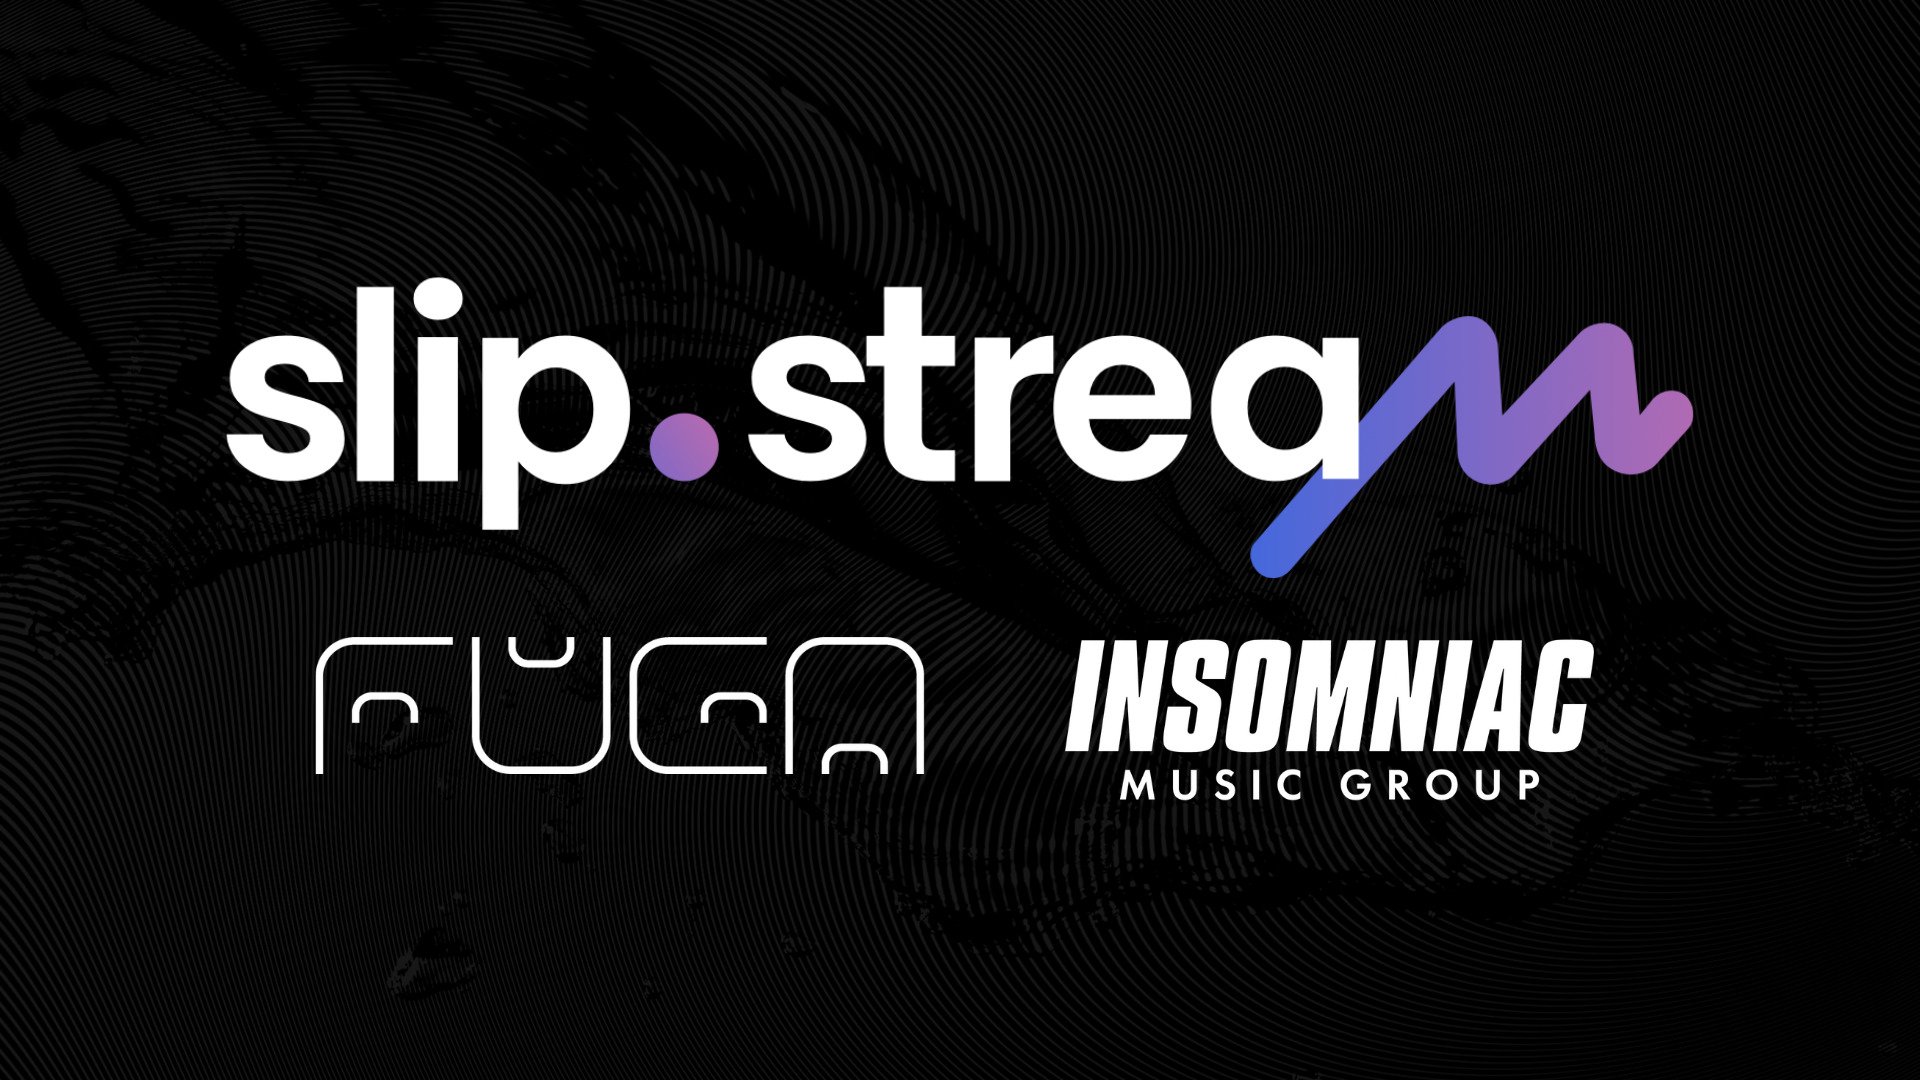 Insomniac Music partners with Slip.stream to provide ‘claim-free’ music to 200k+ creators, brands, businesses – Music Business Worldwide